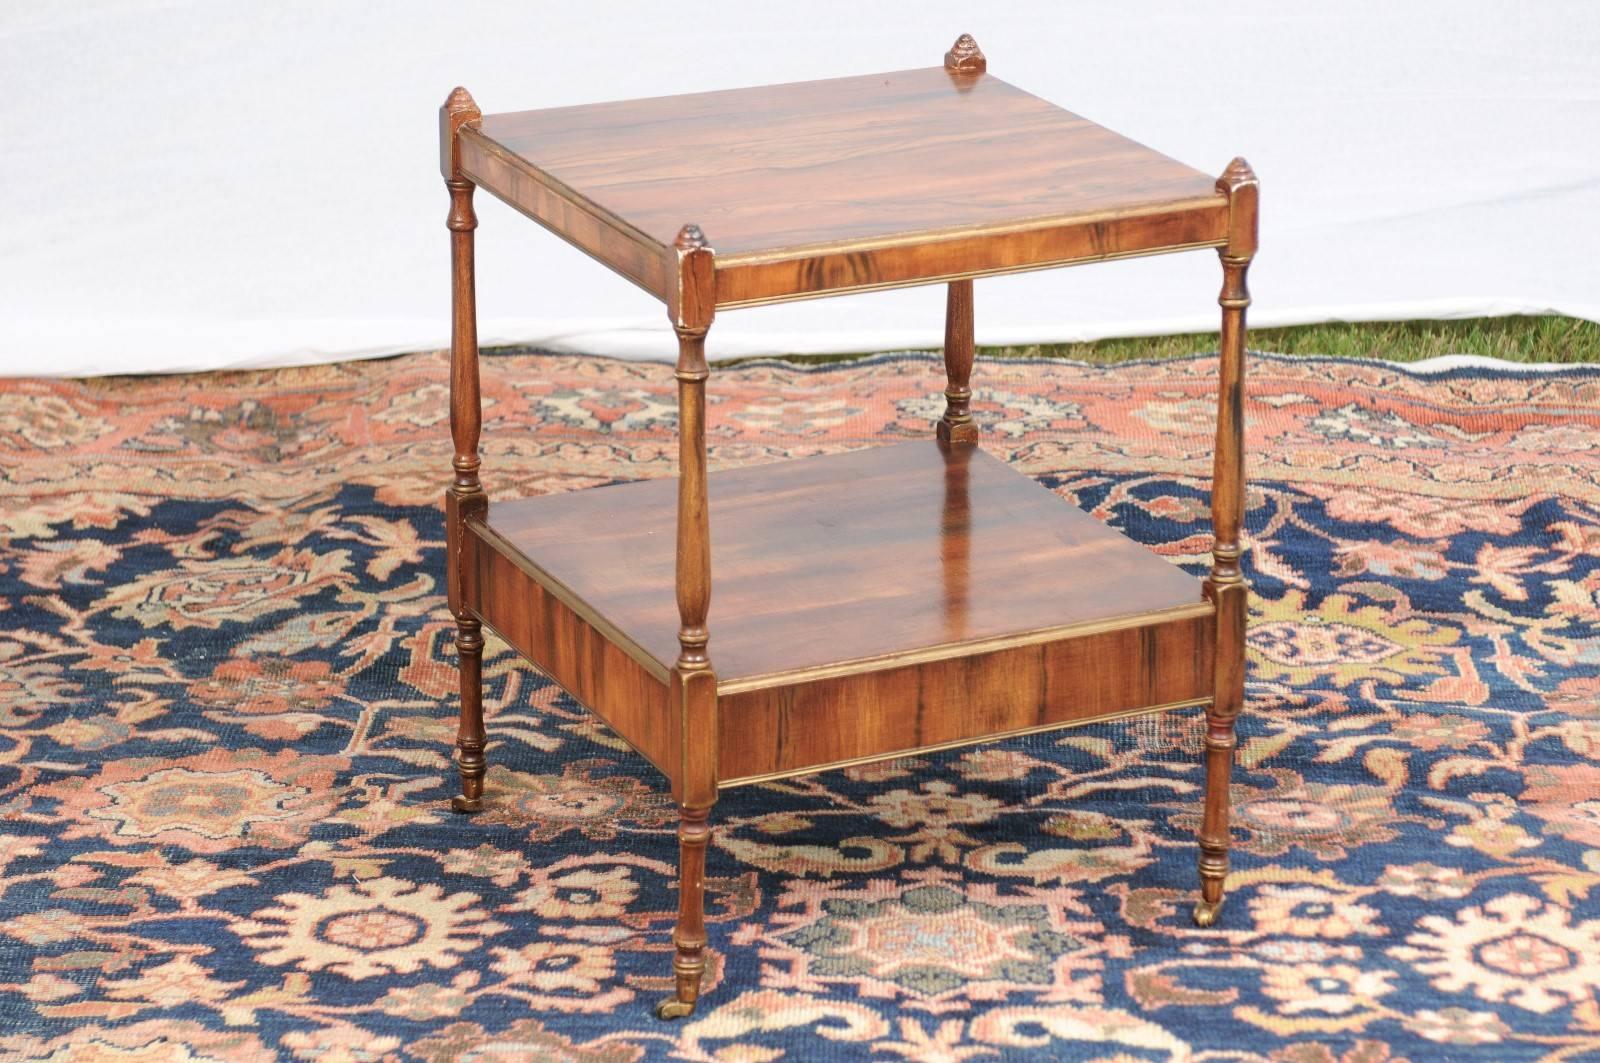 This English two-tiered side table on casters from the early 20th century features a faux-bois painted square top with traces of gold accents on the trim, over a lower shelf with single drawer. The sides are flanked with four thin columns with